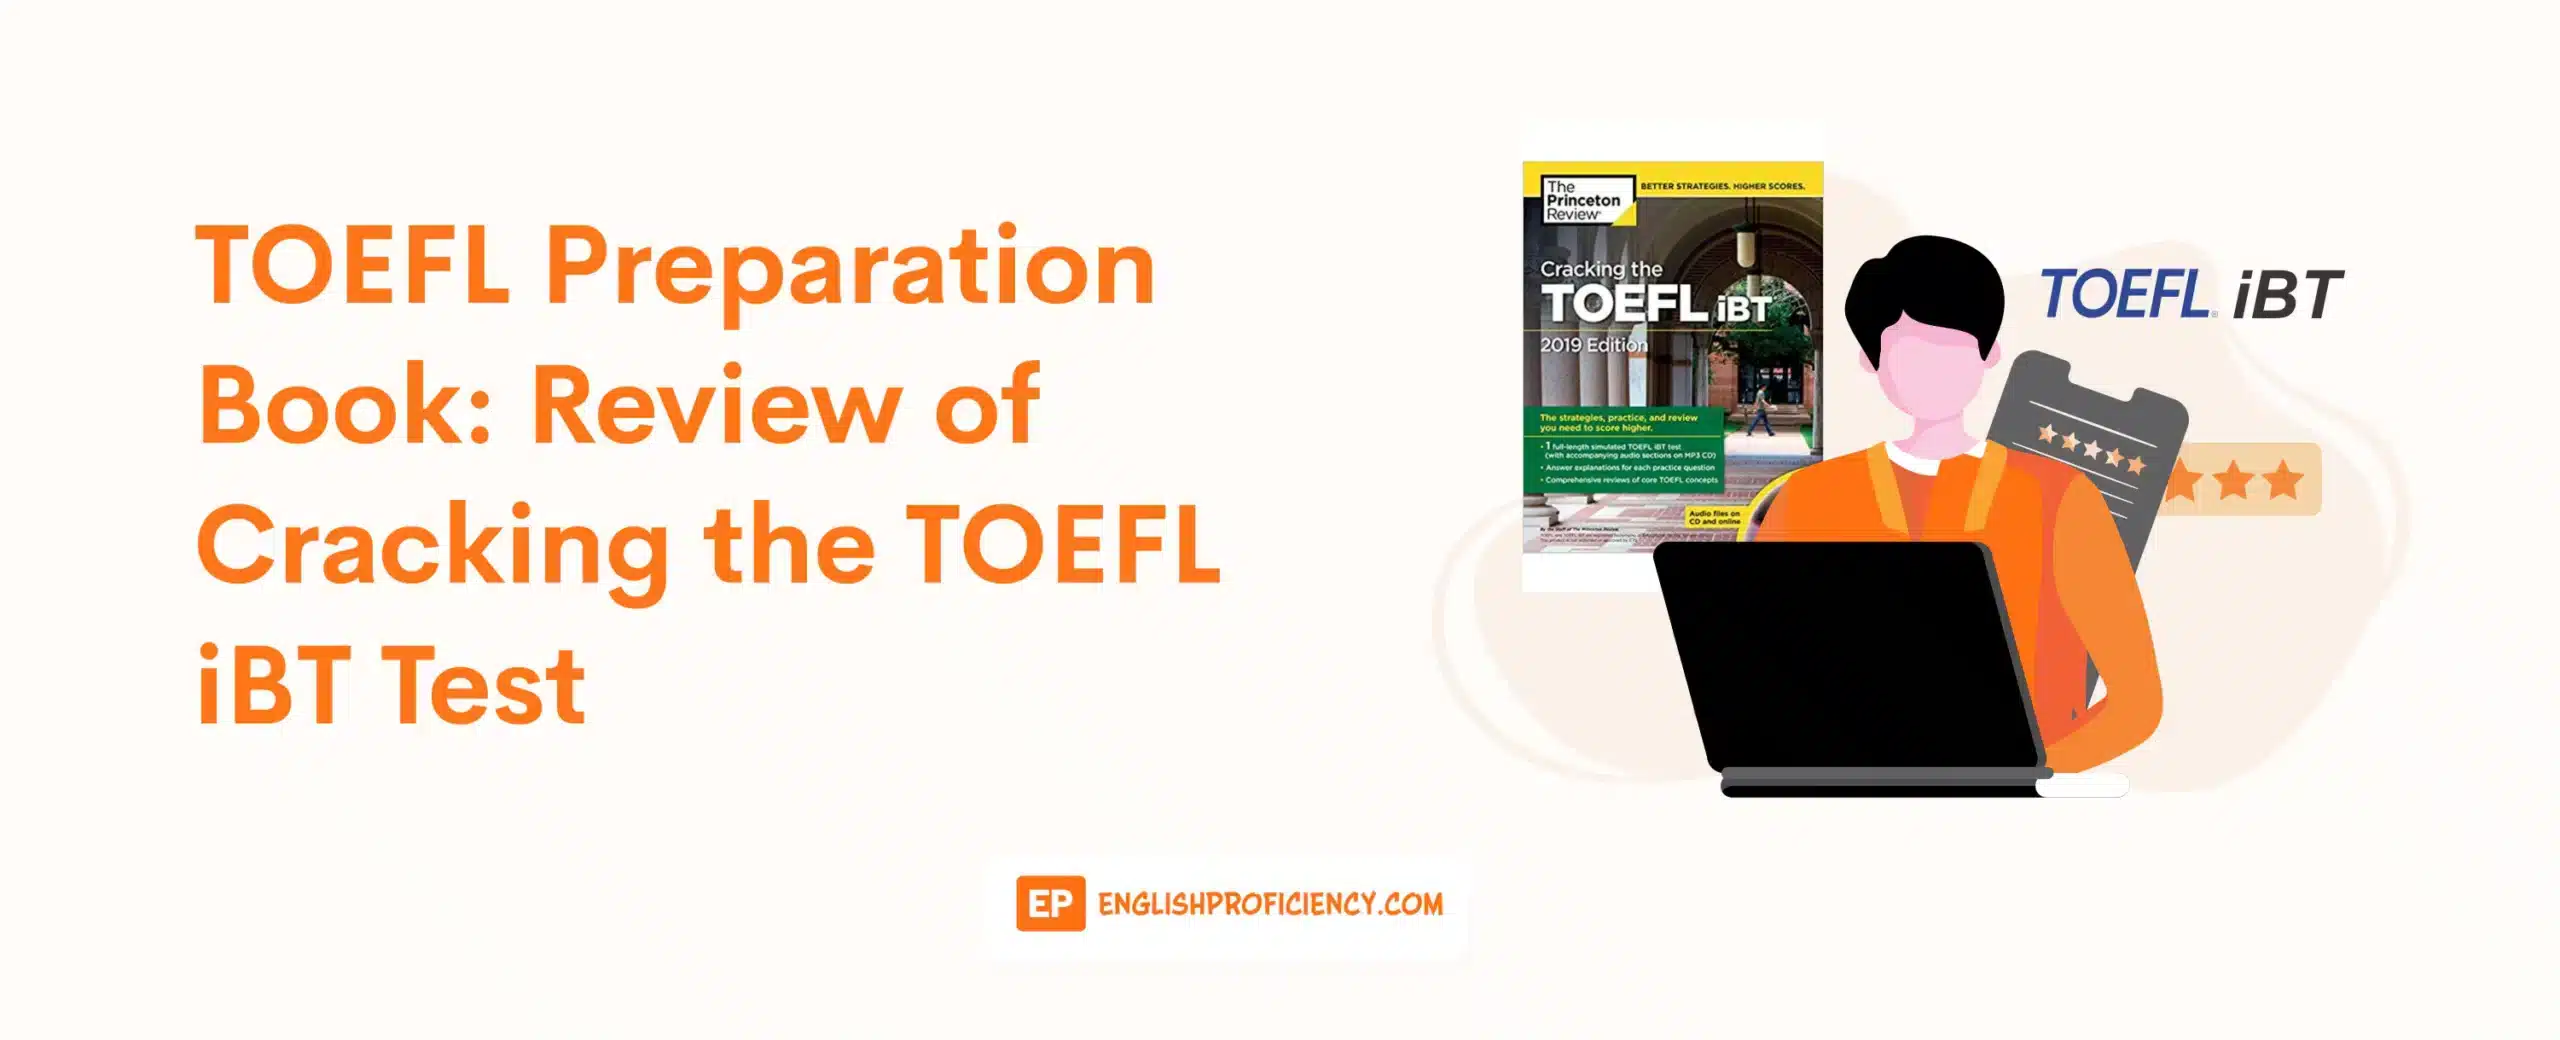 TOEFL Preparation Book Review of Cracking the TOEFL iBT Test